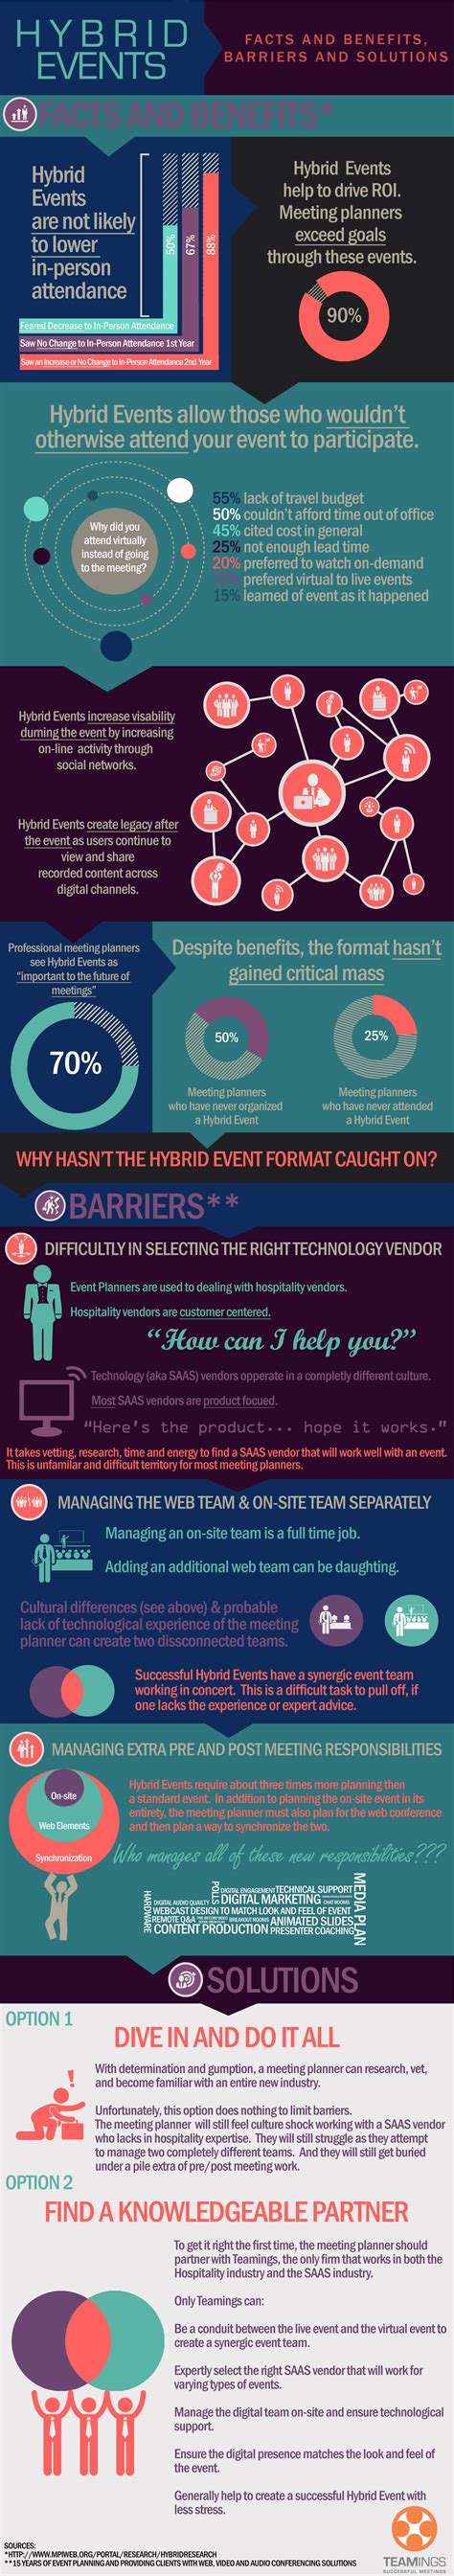 Hybrid Events Infographic Facts And Benefits Barriers And Fears